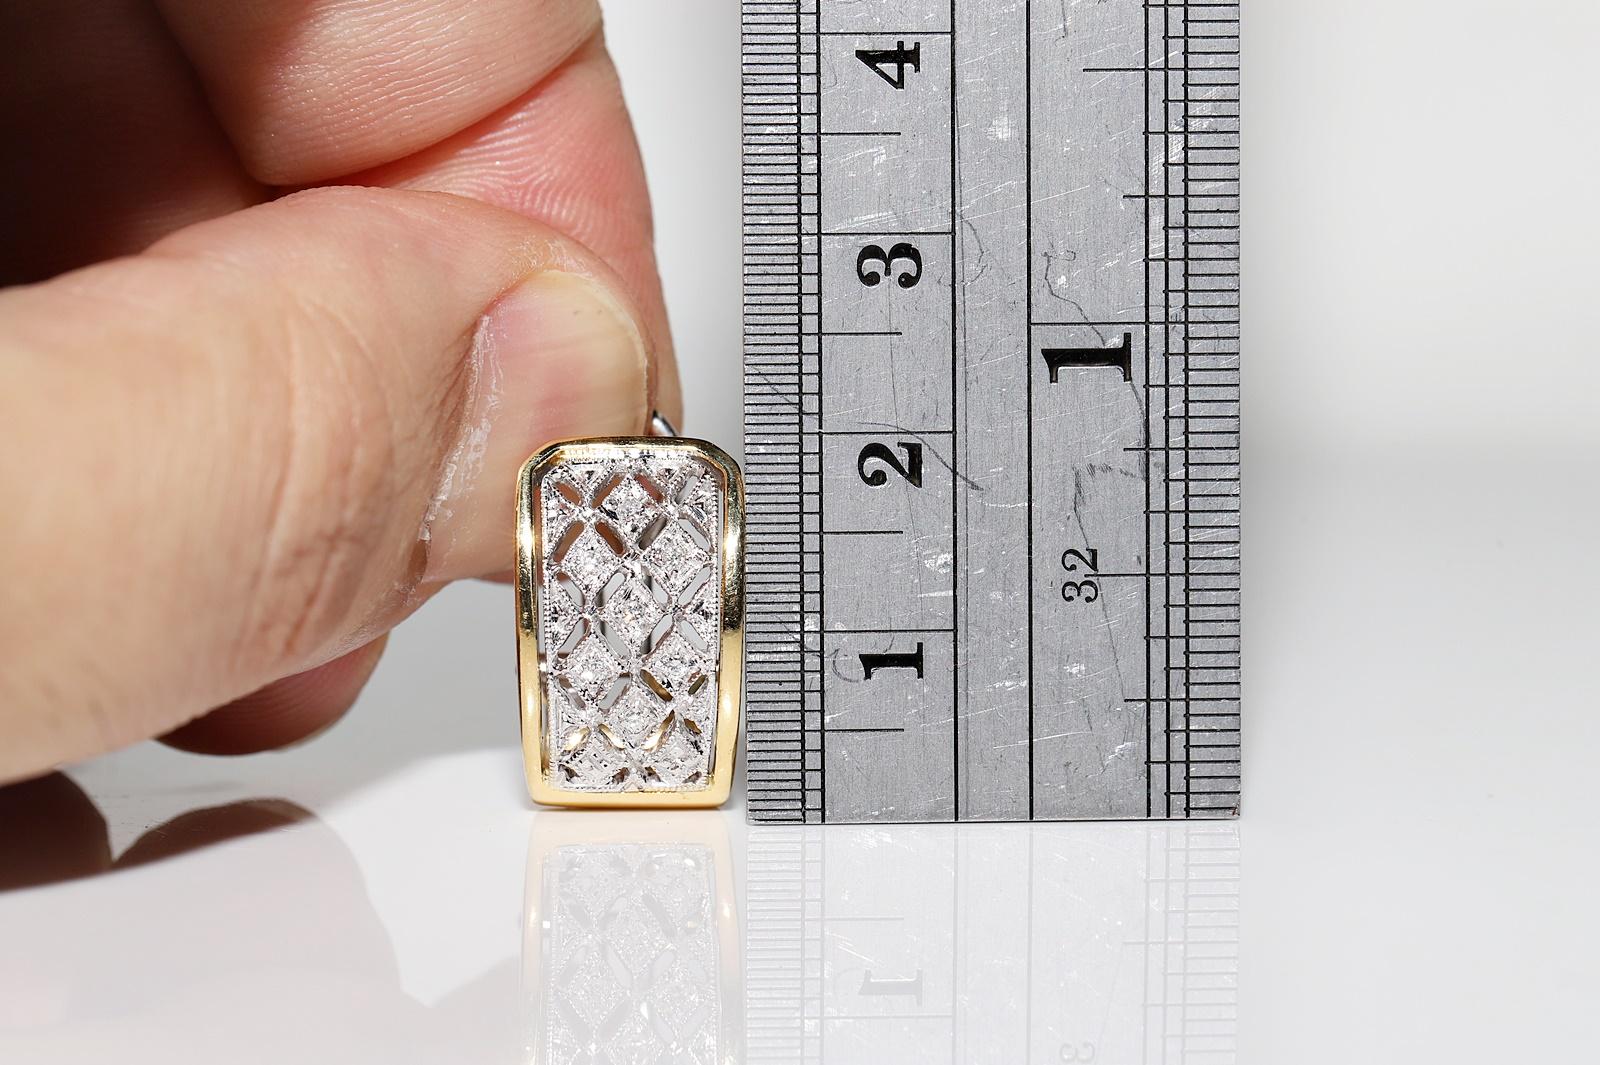 In very good condition.
Total weight is 9.2 grams.
Totally is dimond 0.15 ct.
The diamond is has H color and vs-s1 clarity.
Please contact for any questions.